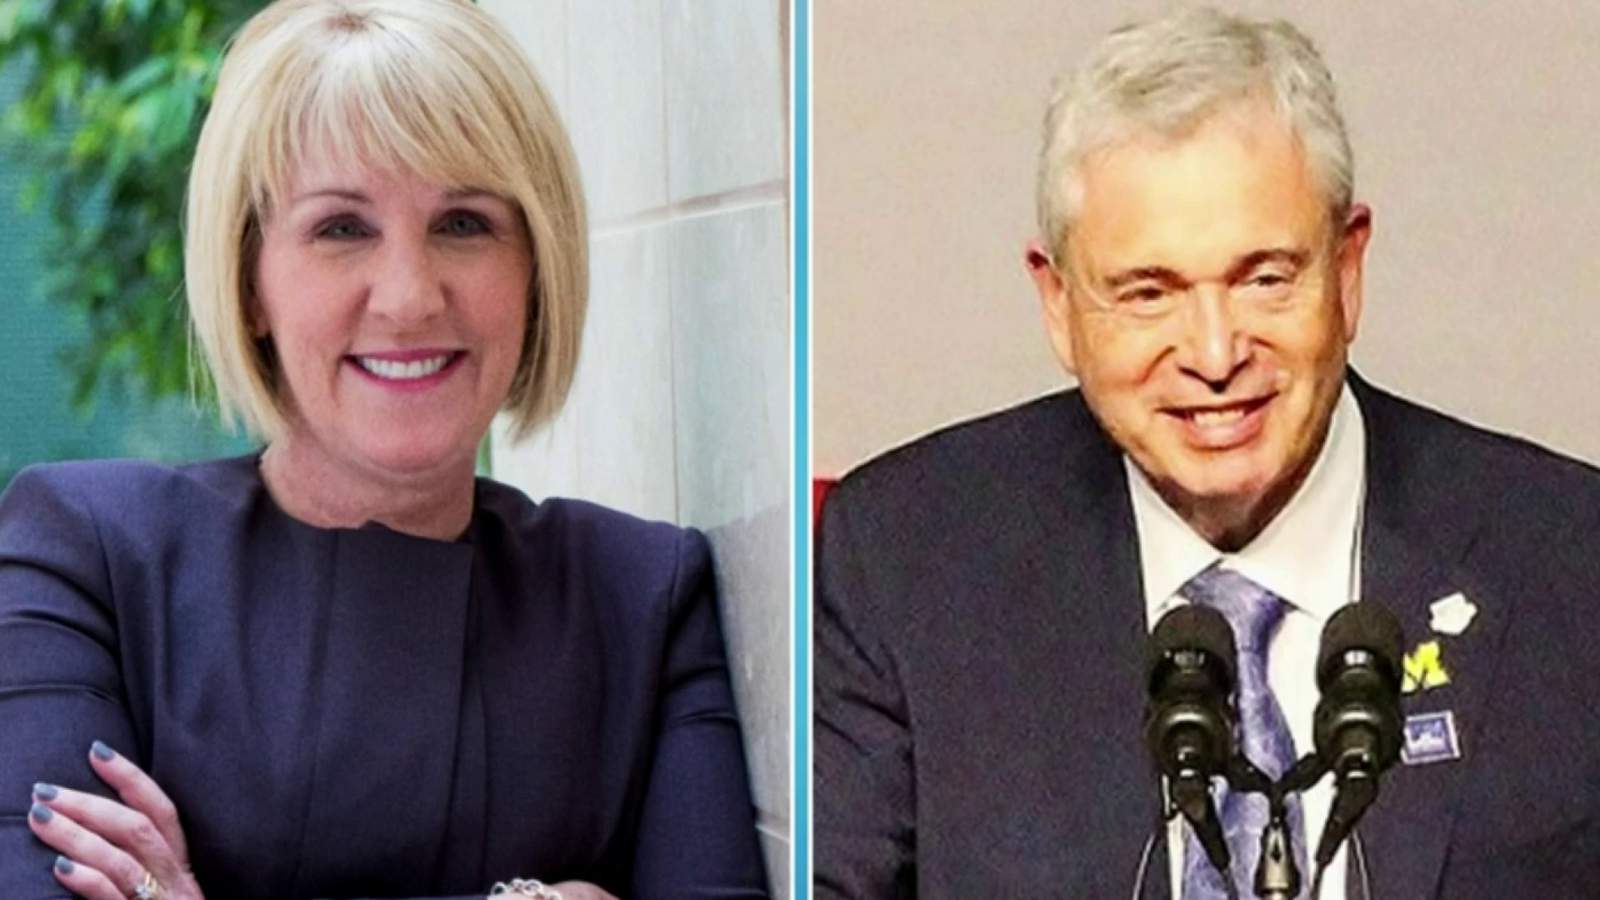 Michigan GOP Chair Laura Cox accuses Ron Weiser of paying candidate to drop out of 2018 state race